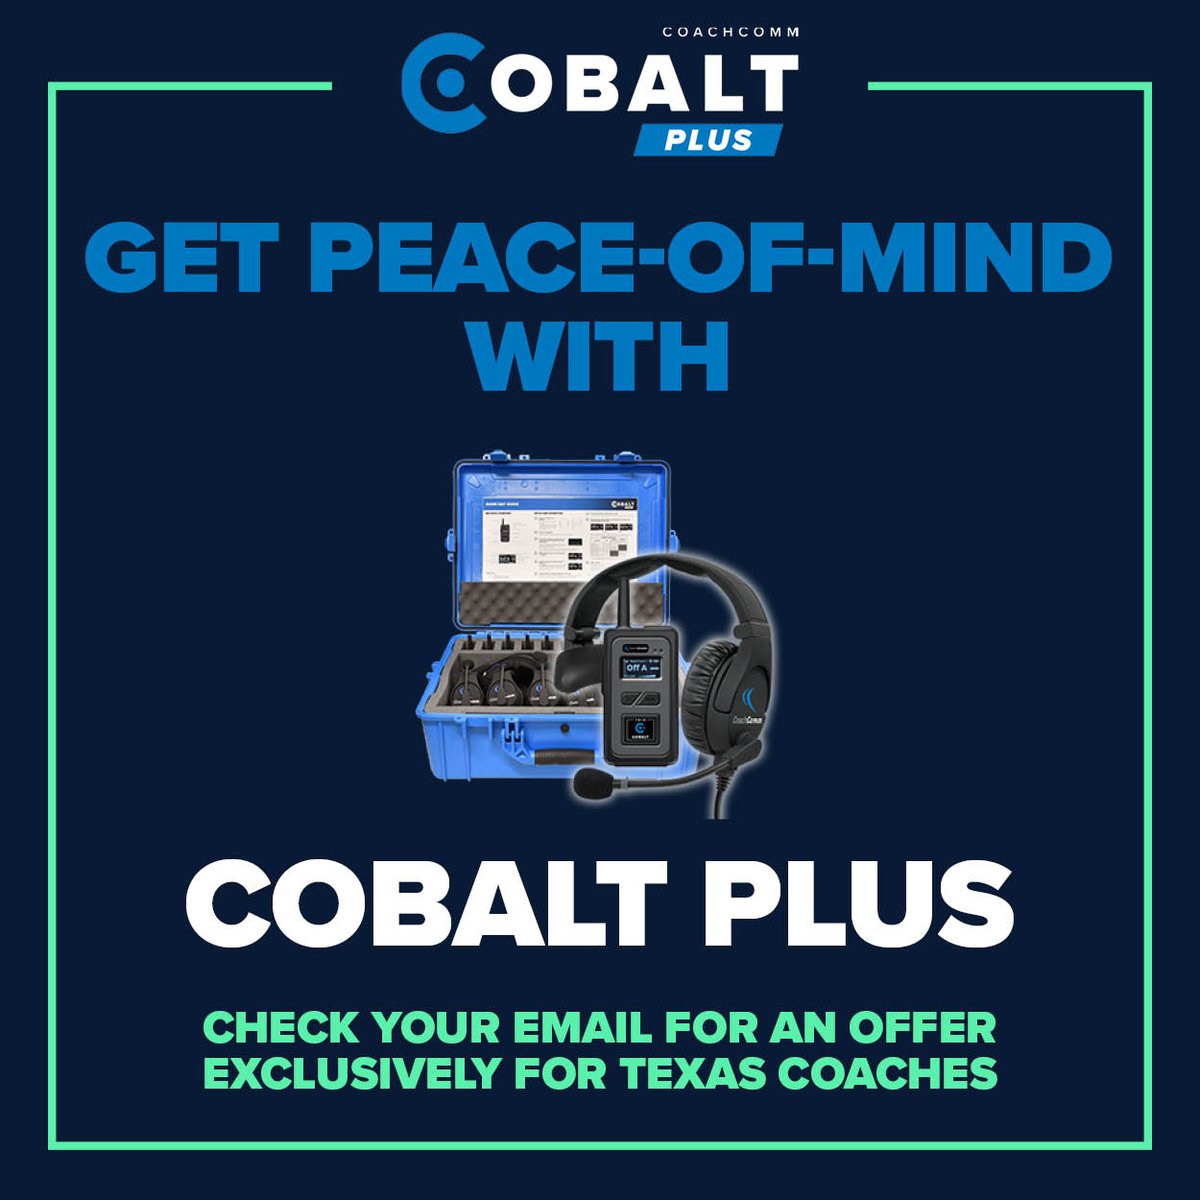 ❕ Texas Coaches ❕
Check your email today for an exclusive offer from @CoachComm. 
Don’t wait – upgrade to CoachComm’s Cobalt PLUS and get peace-of-mind on game day! 
Click here to learn more: bit.ly/44oFFcW 
#CobaltPLUS #CoachingHeadsets #WinningSolutions